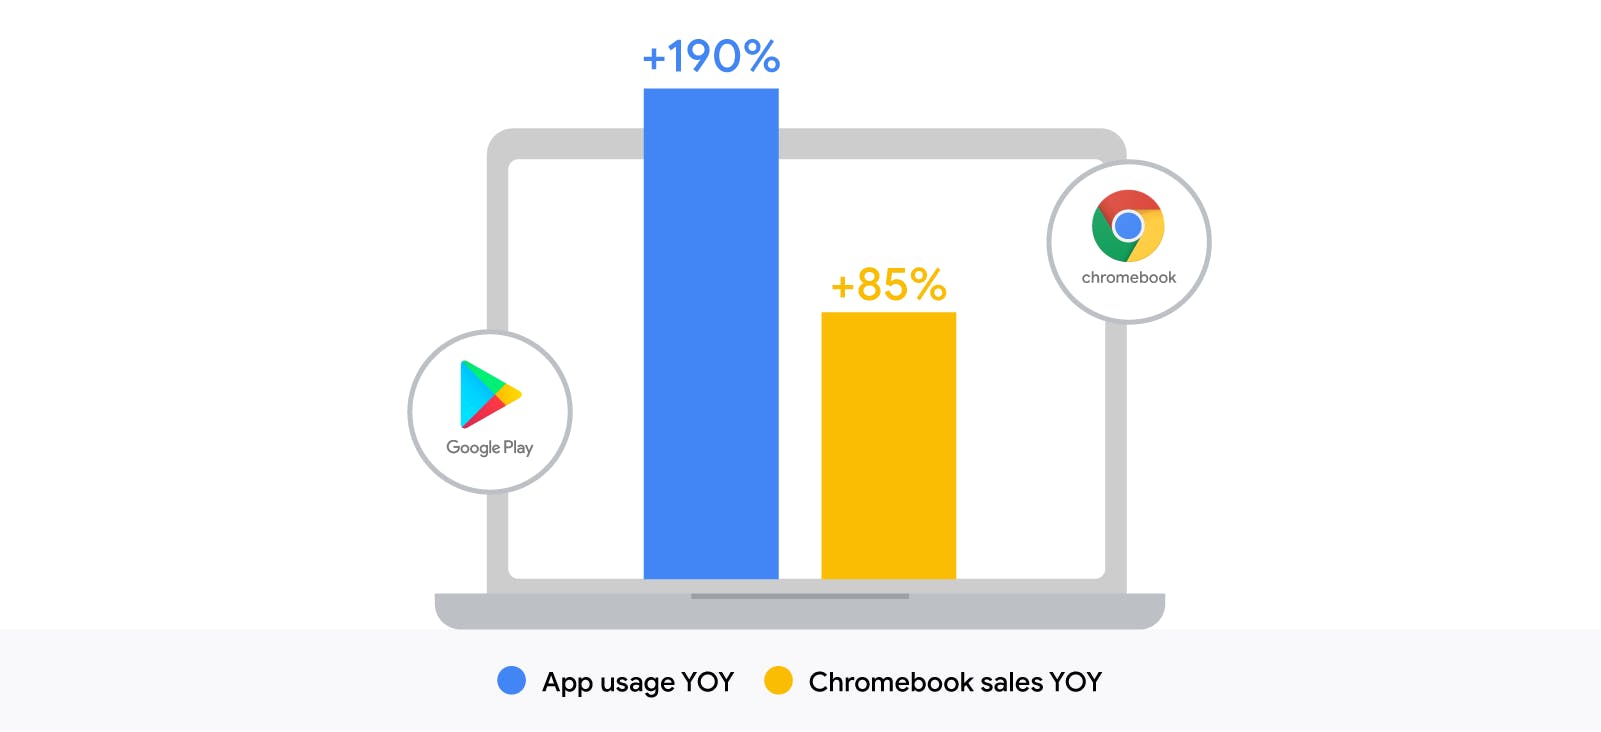 Growth of ChromeOS sales and app usage